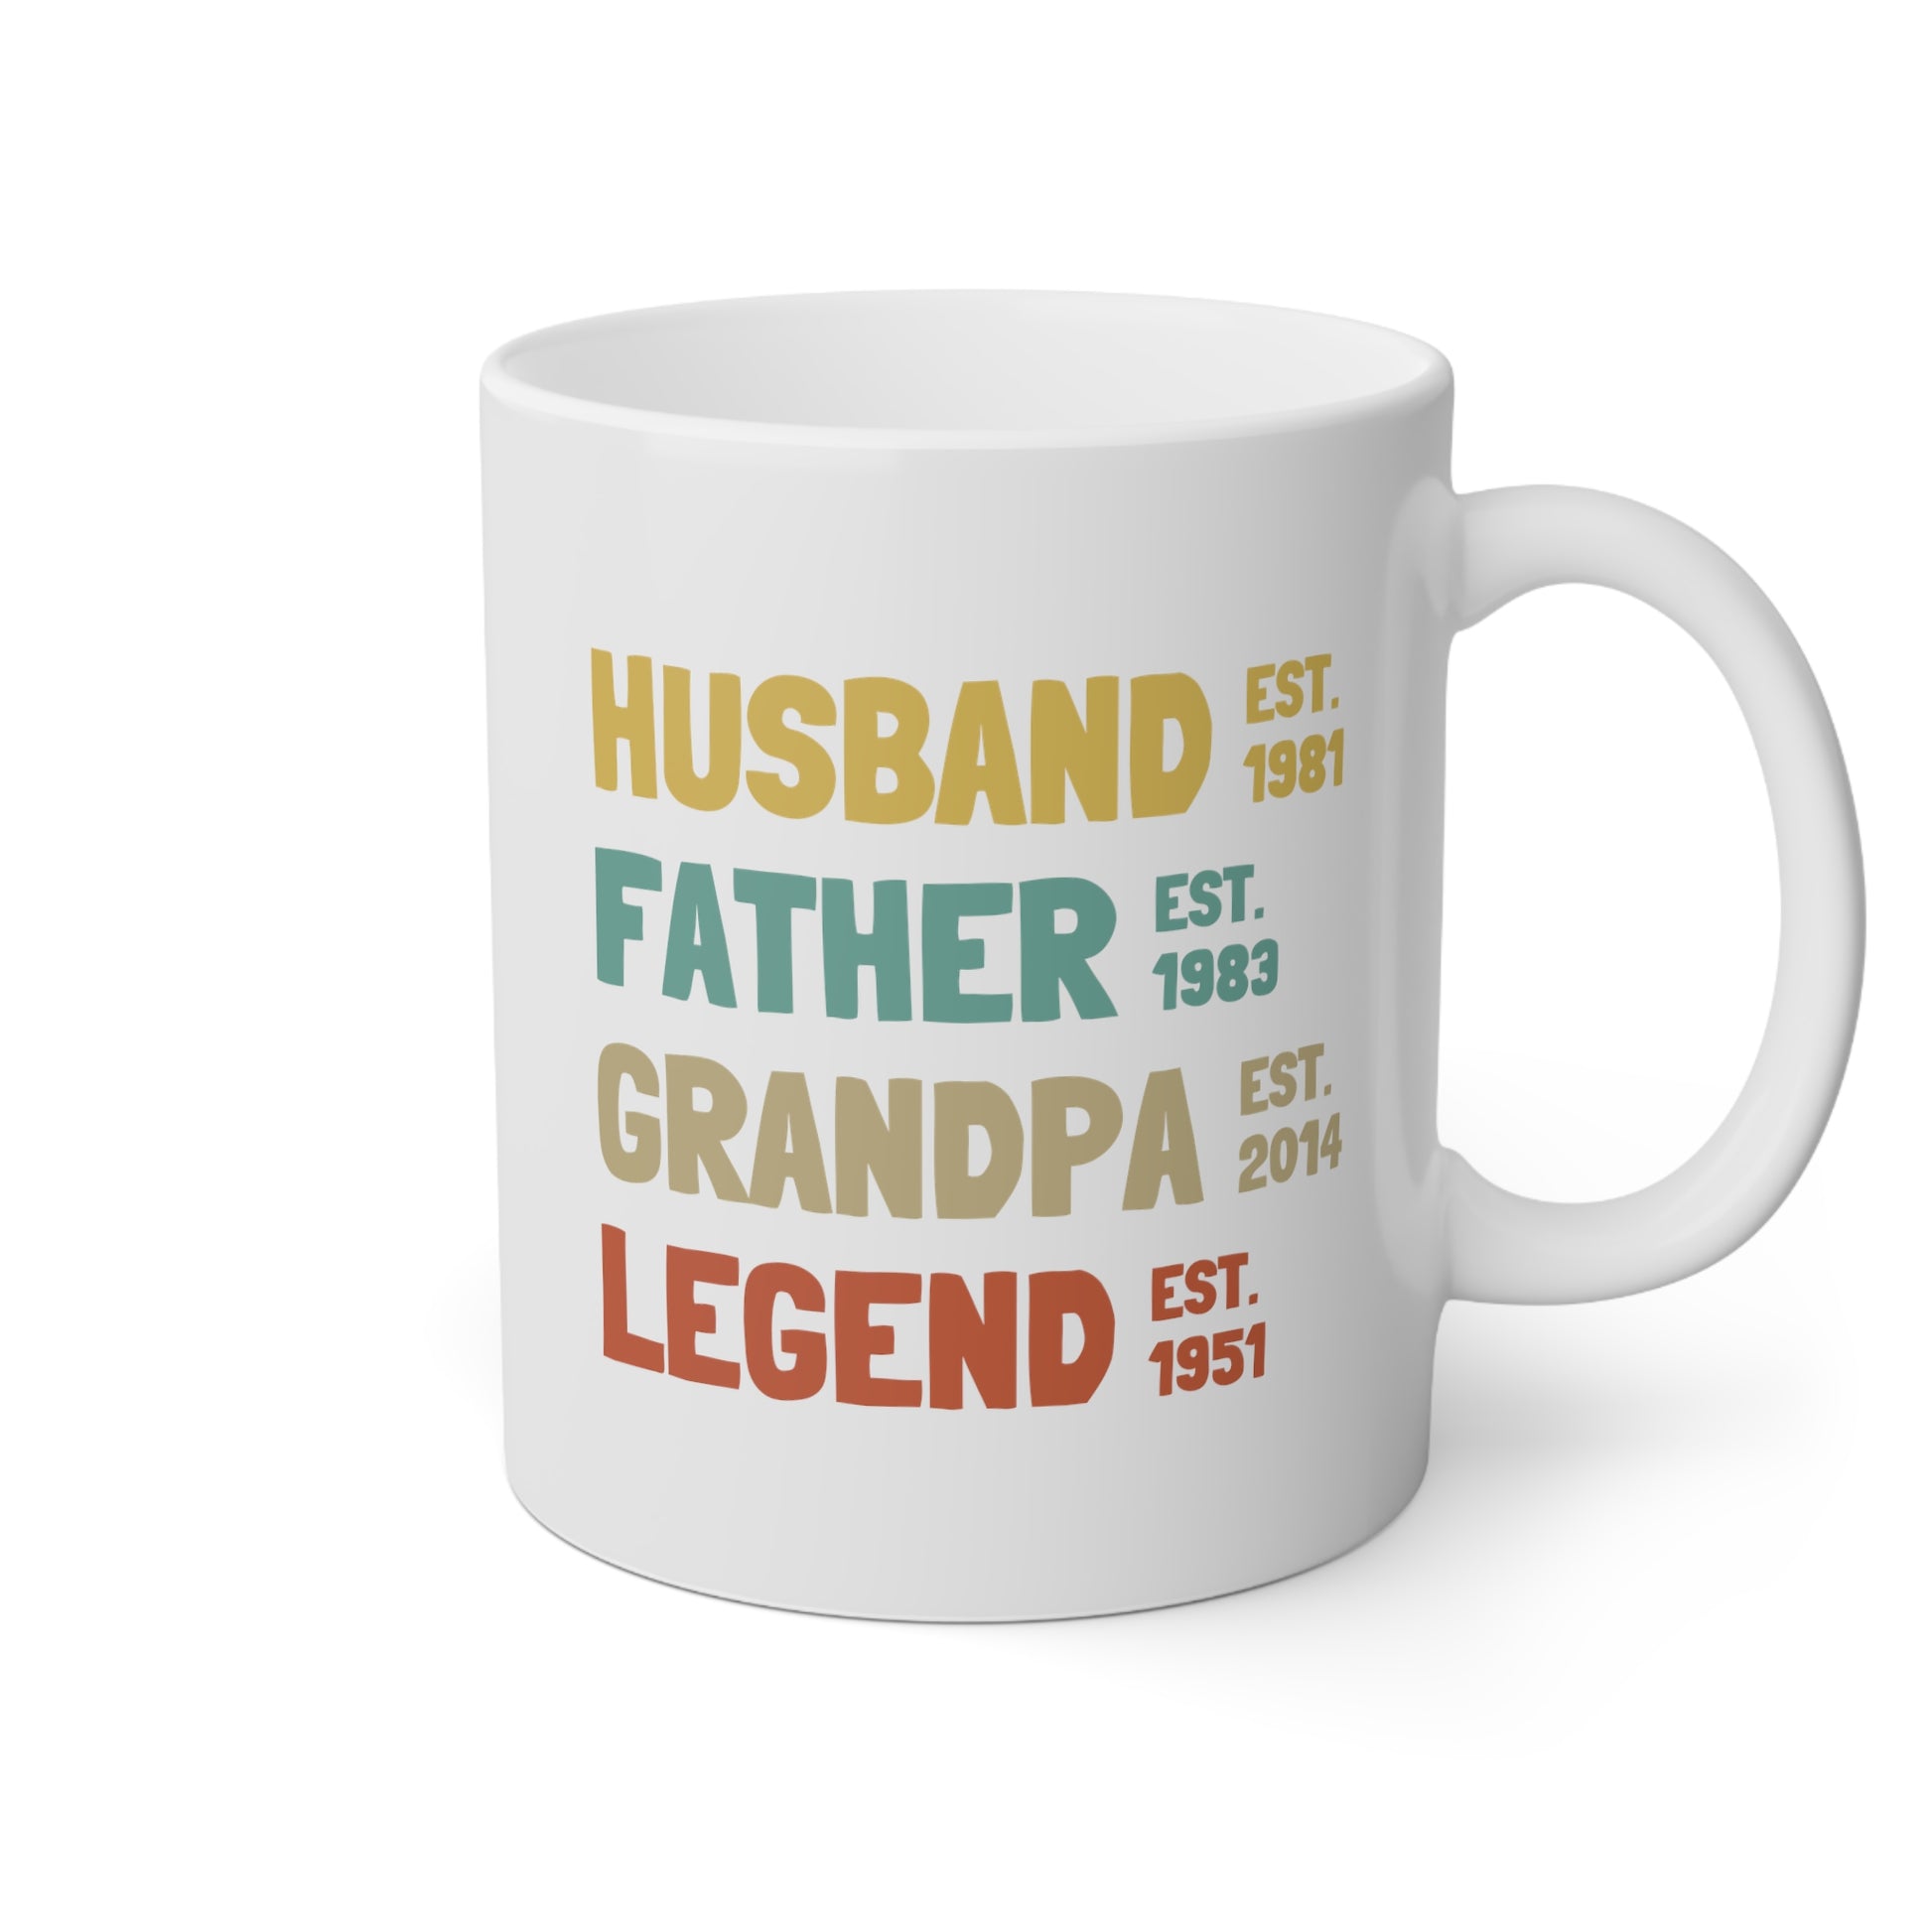 Husband Father Grandpa Legend 11oz white funny large coffee mug gift for dad fathers day birthday custom date personalize customize waveywares wavey wares wavywares wavy wares